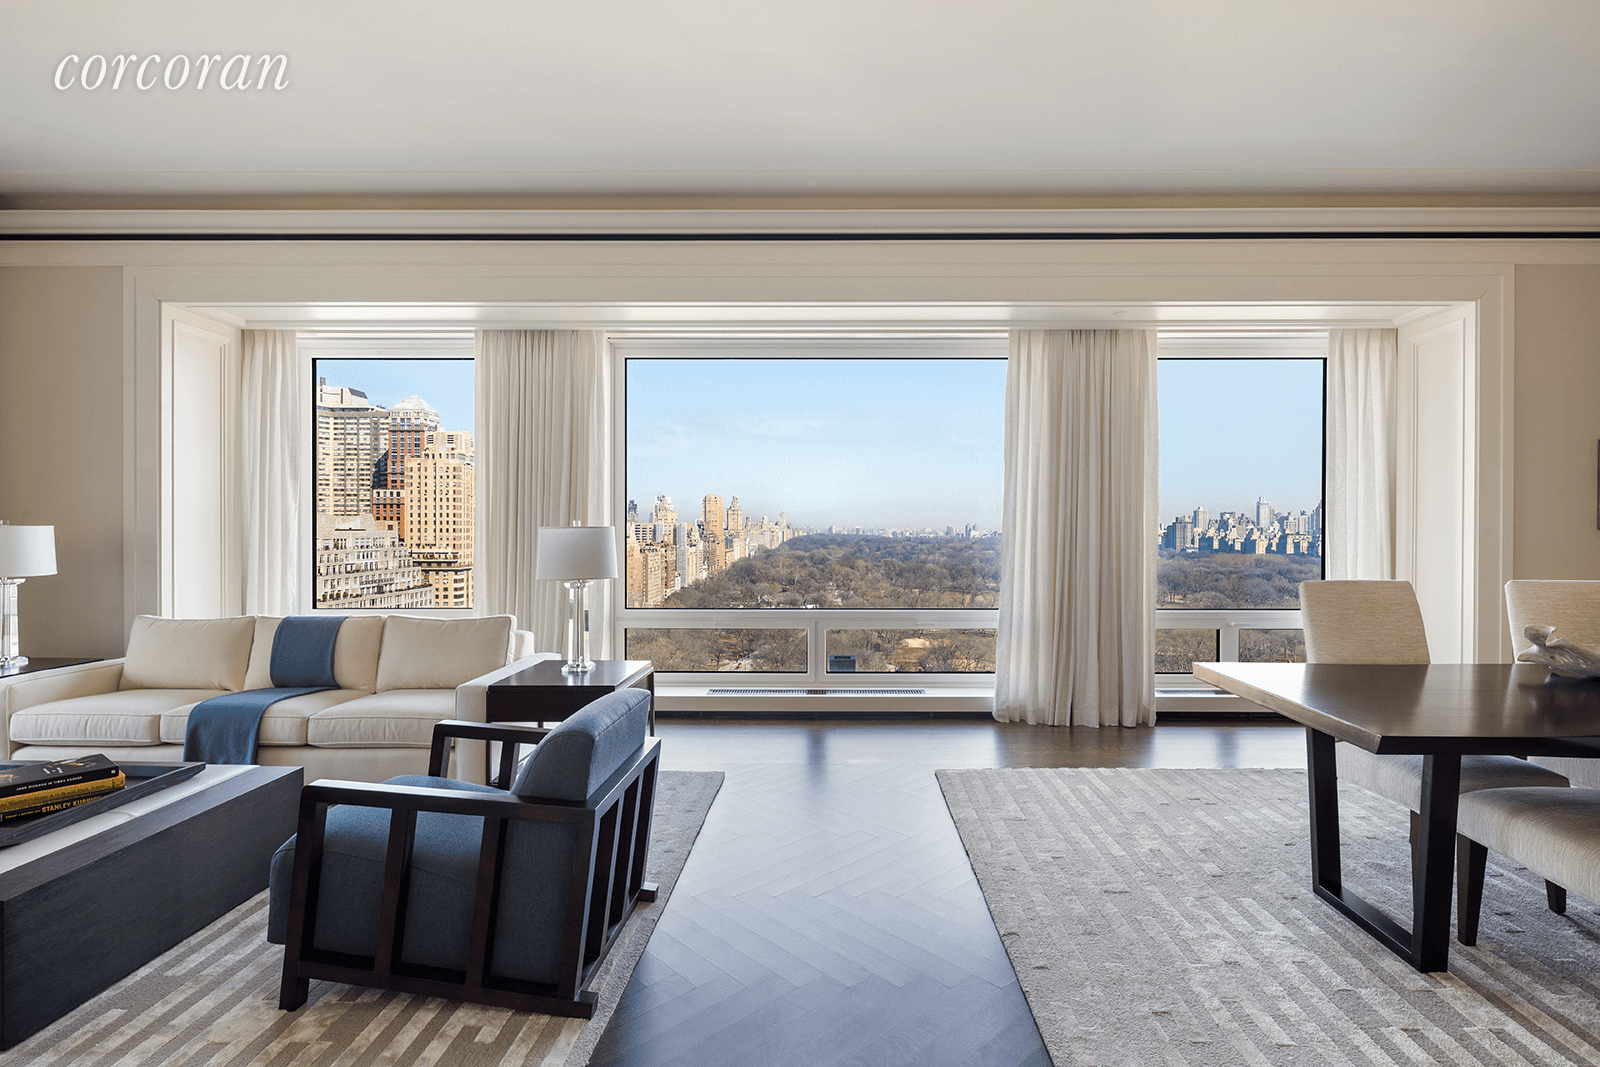 24A is the first available resale A Line two bedroom residence at 220 Central Park South, New York CityA s preeminent new address designed by Robert A.